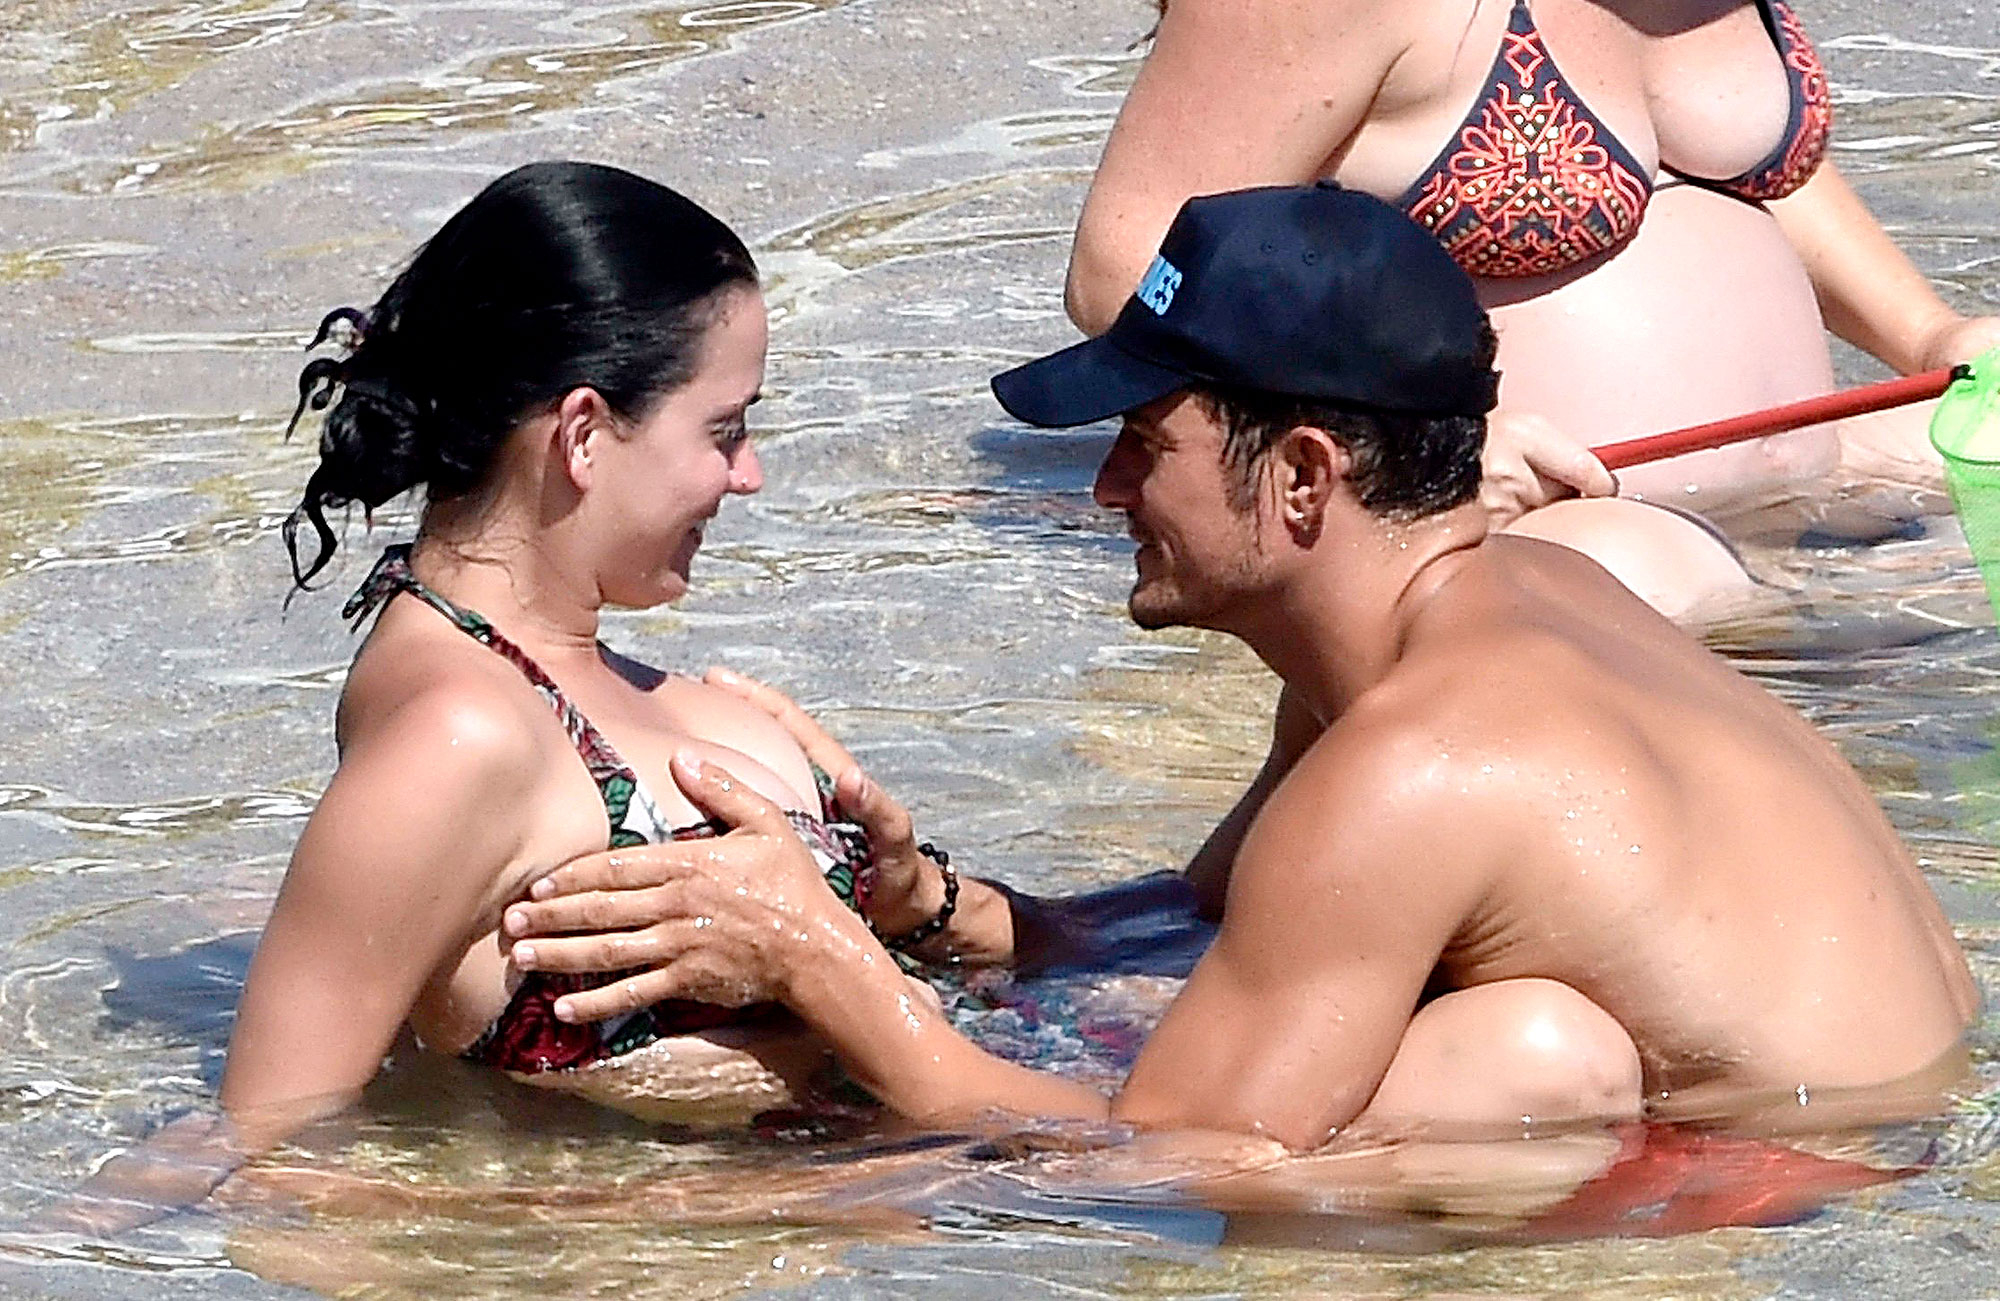 Katy Perry Porn For Real - Orlando Bloom Grabs Katy Perry's Boobs During Beach Vacation